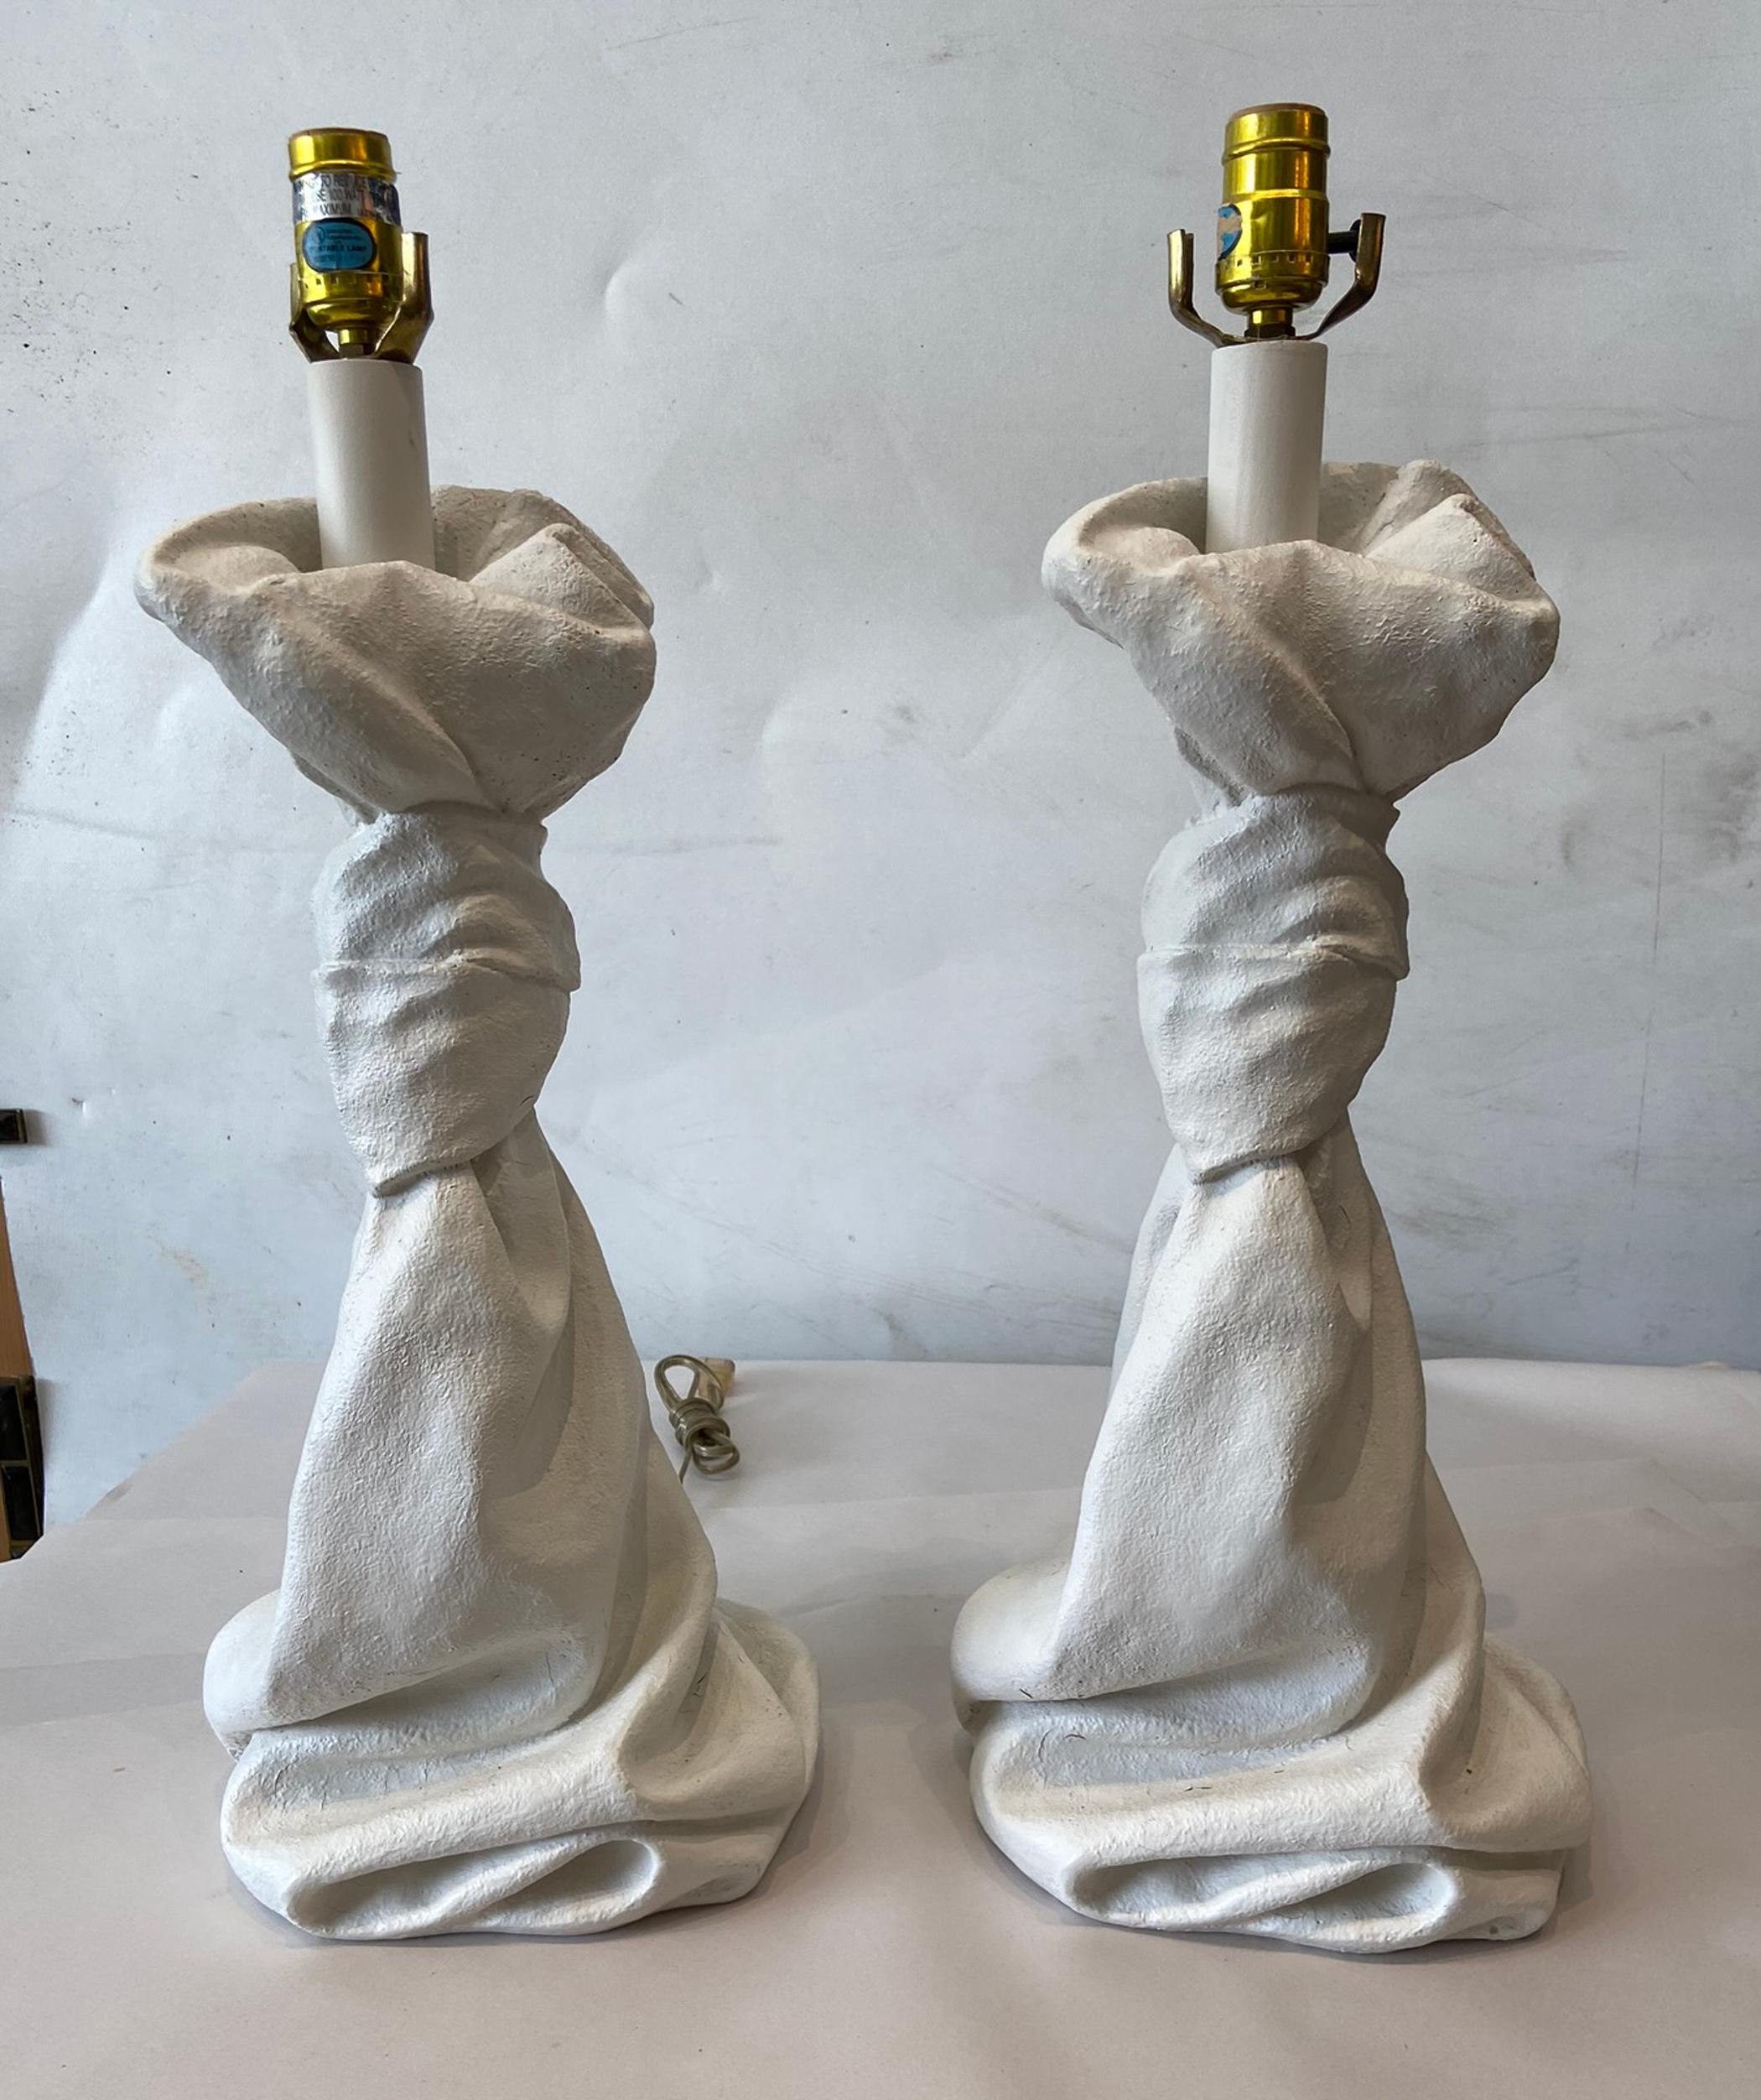 Pair of Jonathan Dickinson style plaster table lamps. Knot at the top twisted stem with a linen fold base.